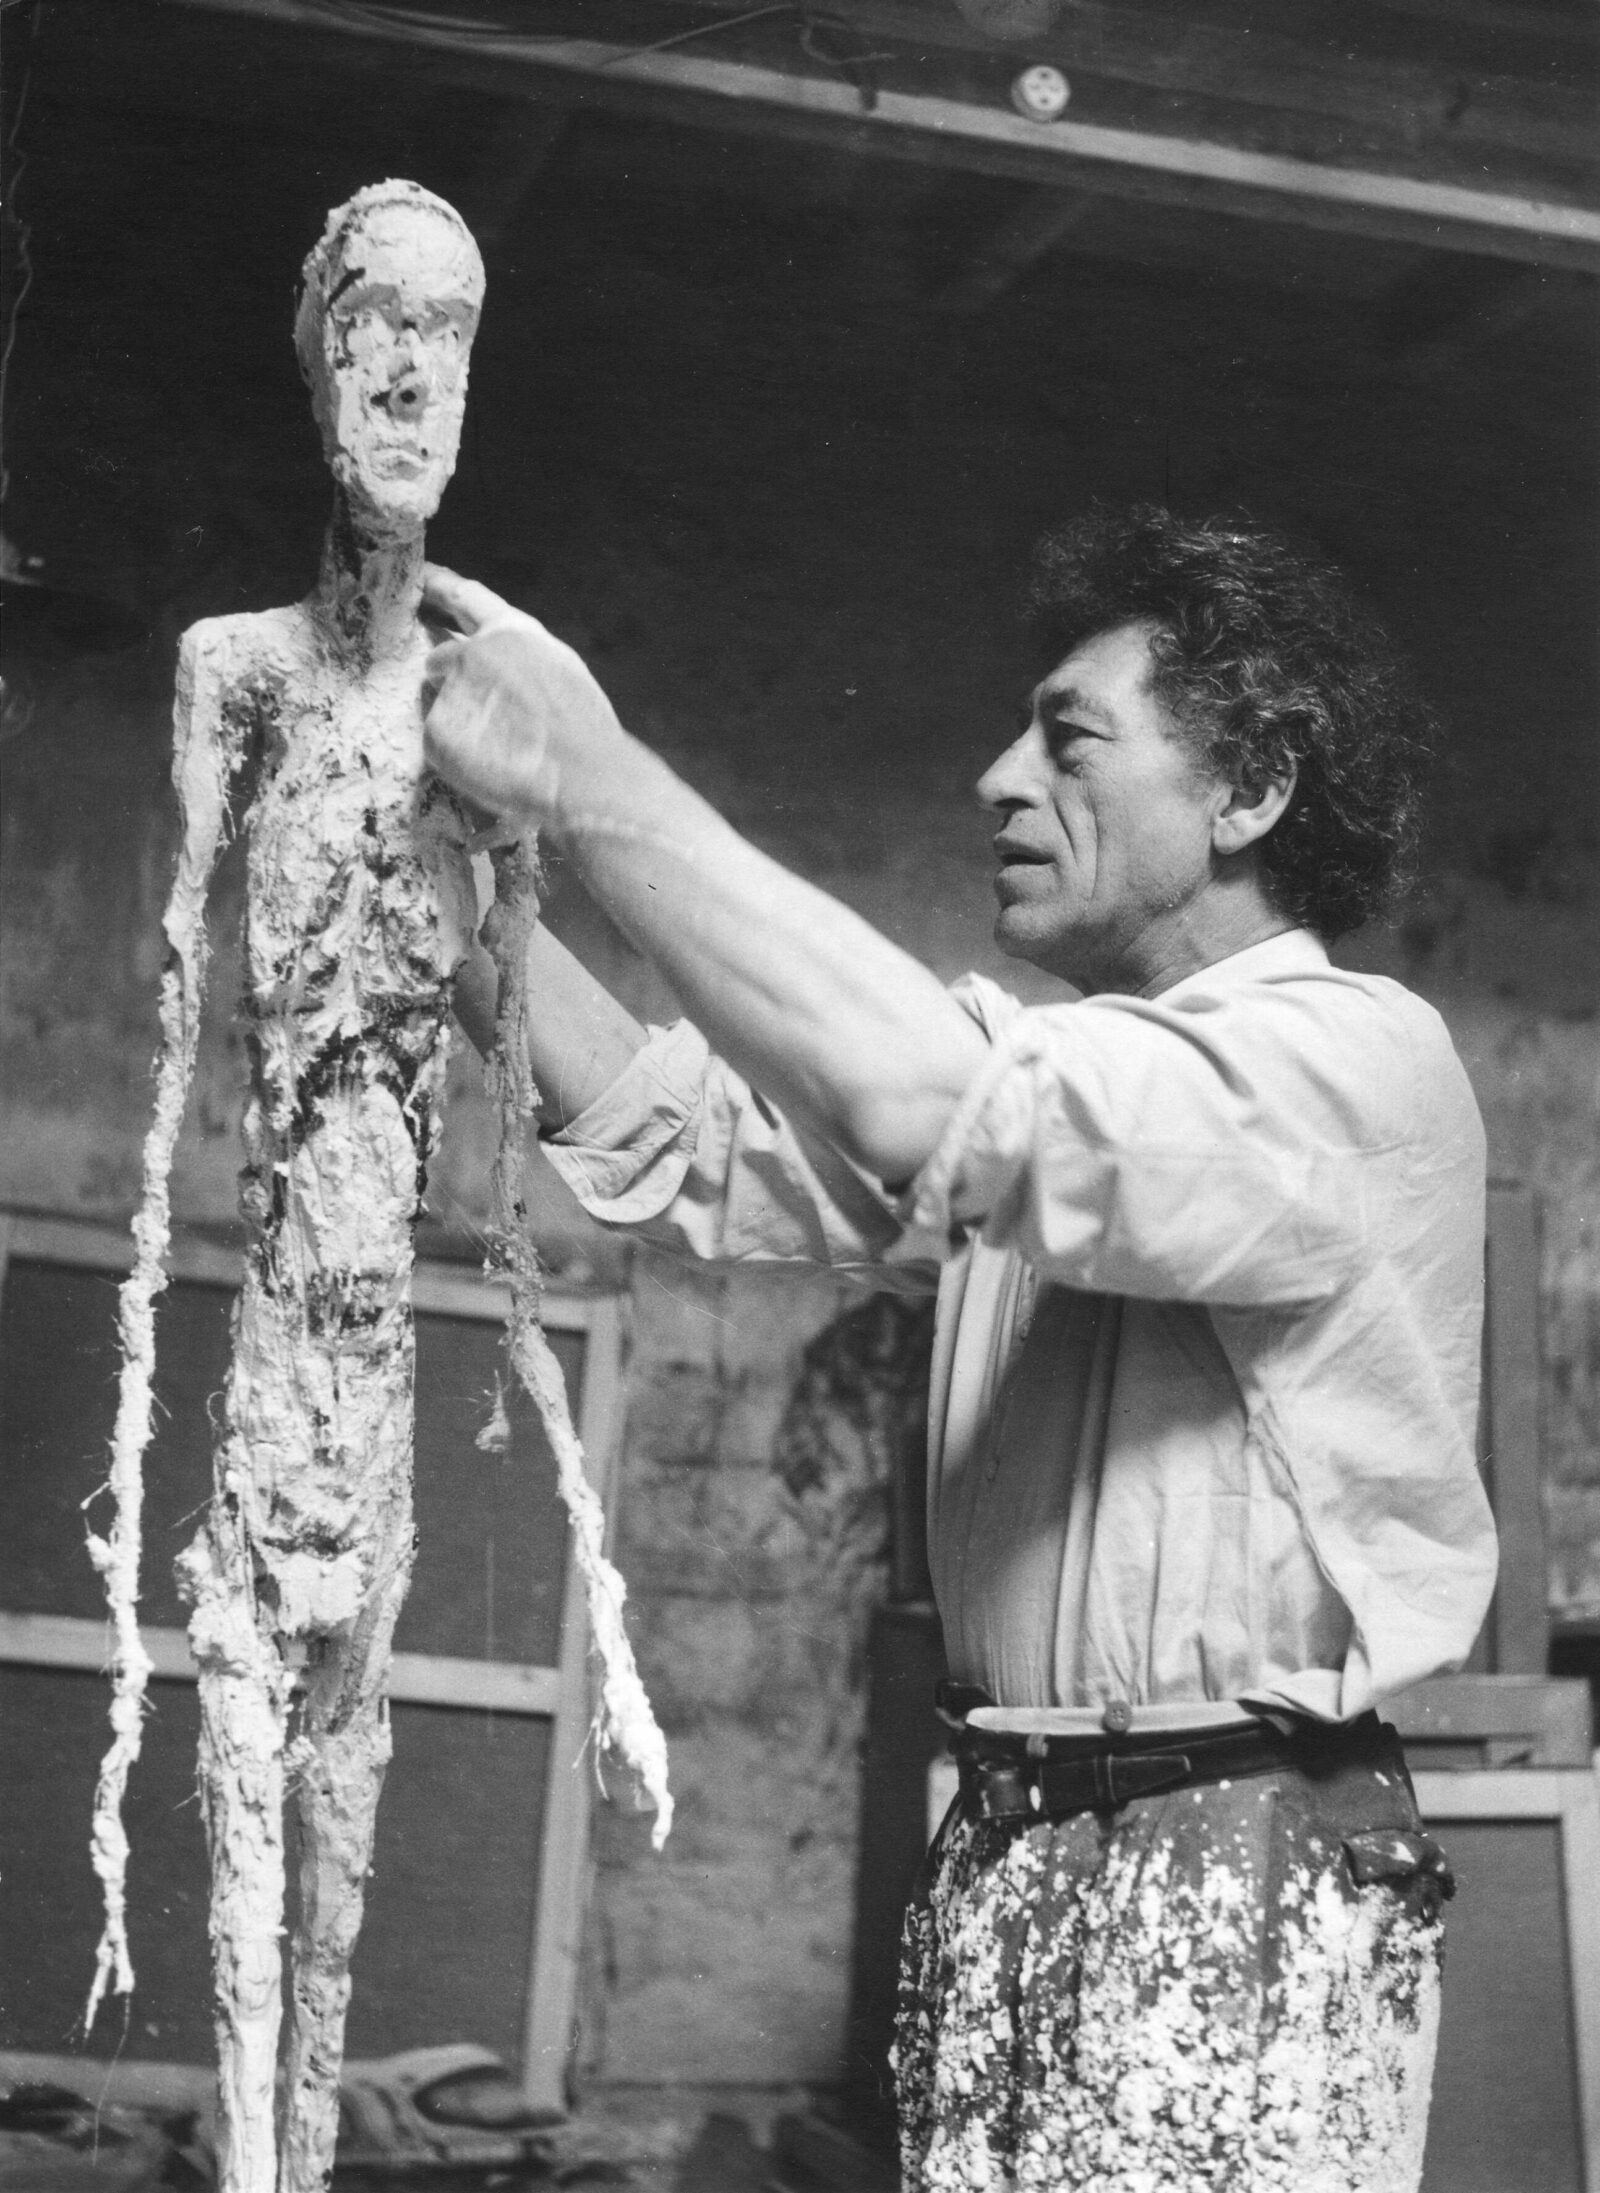 Ernst Scheidegger, Alberto Giacometti Working on the Plaster of the “Walking Man,” c. 1959, silver print on paper, Archives, Fondation Giacometti. © 2022 Artists Rights Society (ARS), New York / ProLitteris, Zurich